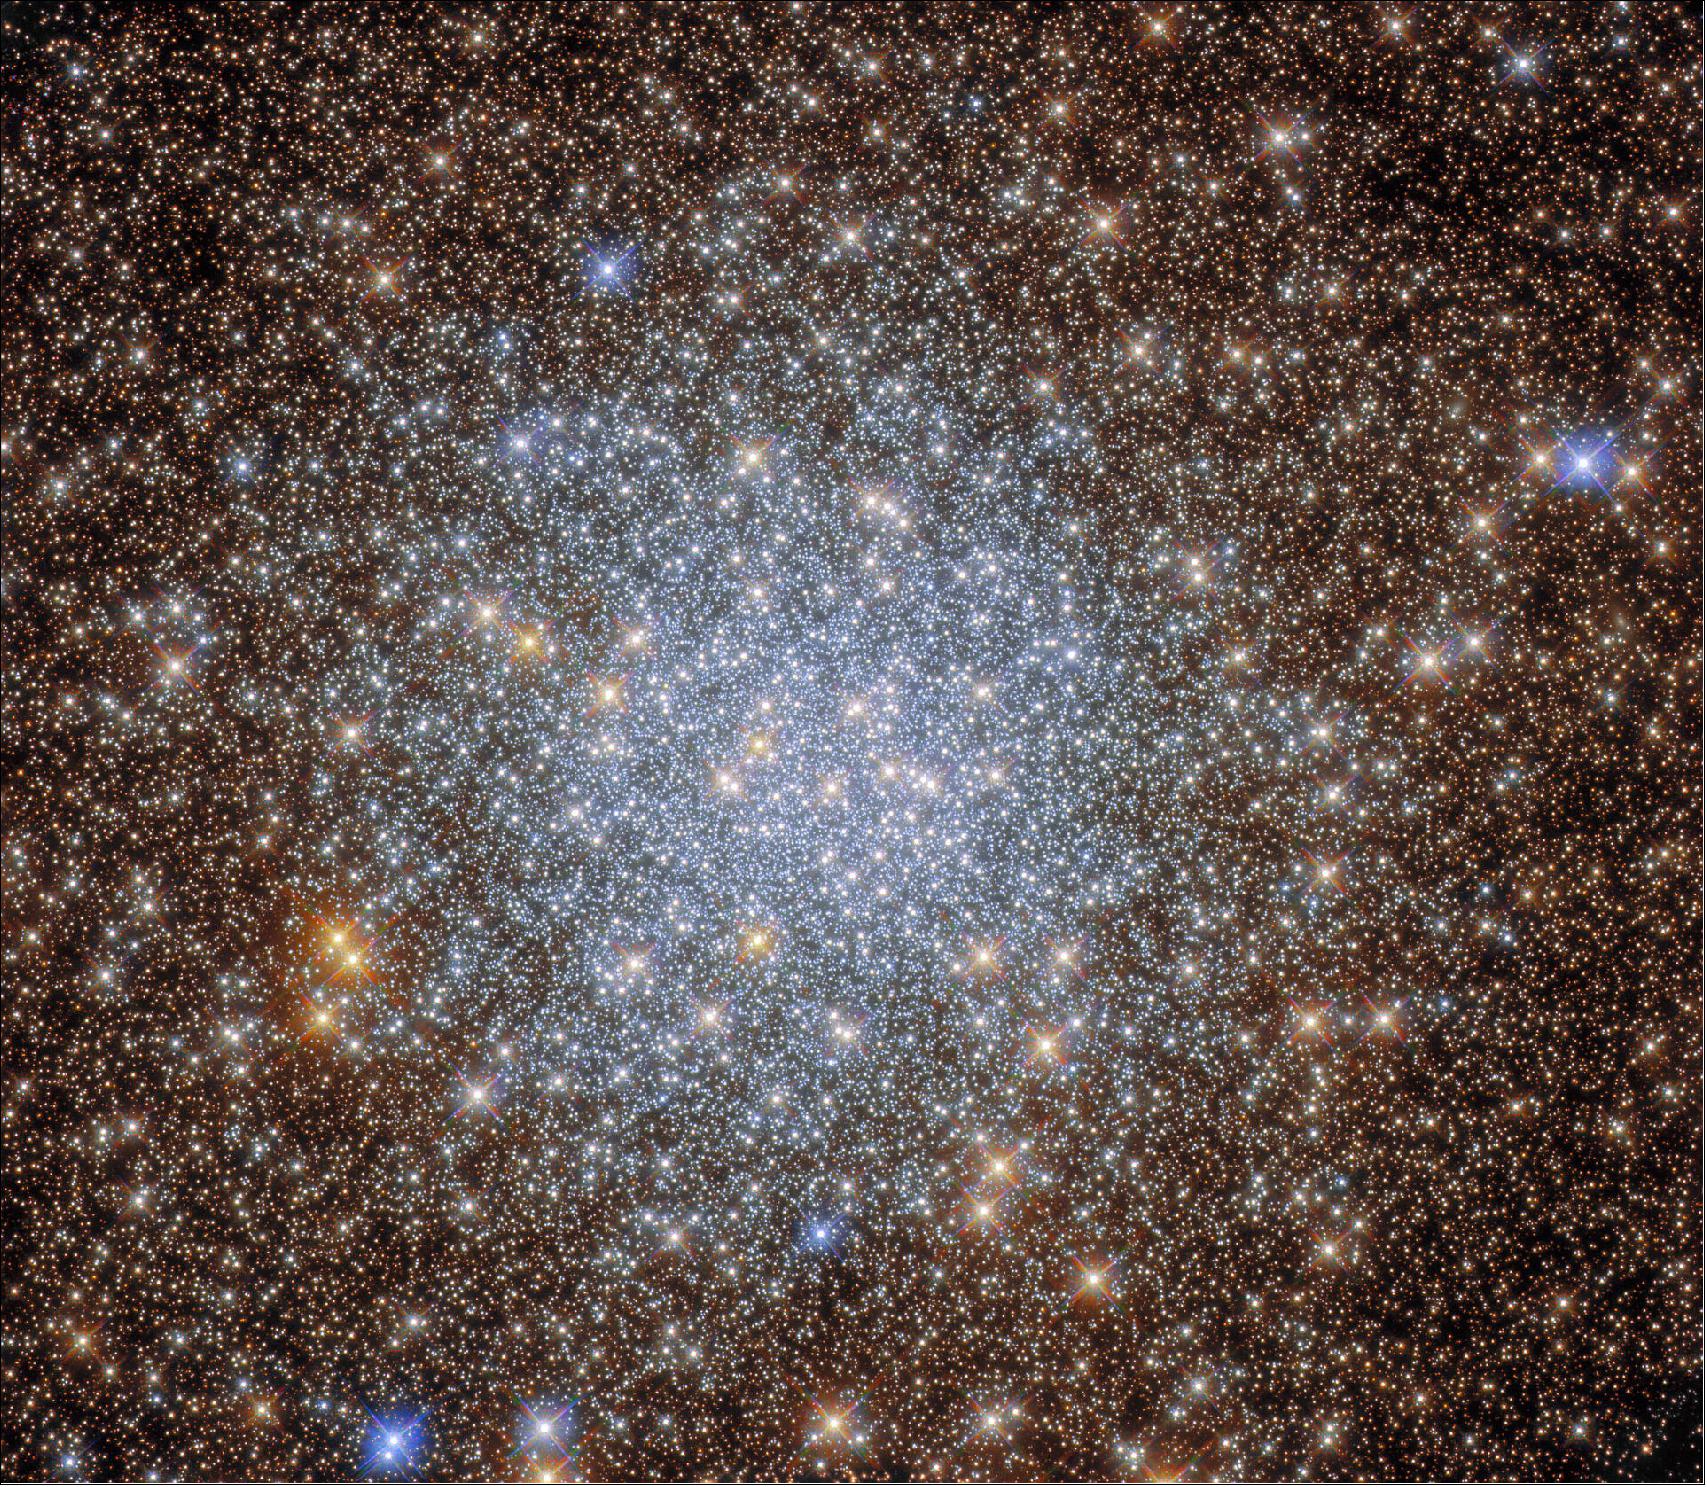 Figure 14: The astronomers who proposed these observations combined data from Hubble with data from astronomical archives, allowing them to measure the ages of globular clusters including NGC 6569. Their research also provided insights into the structure and density of globular clusters towards the centre of the Milky Way (image credit: ESA/Hubble & NASA, R. Cohen; CC BY 4.0)